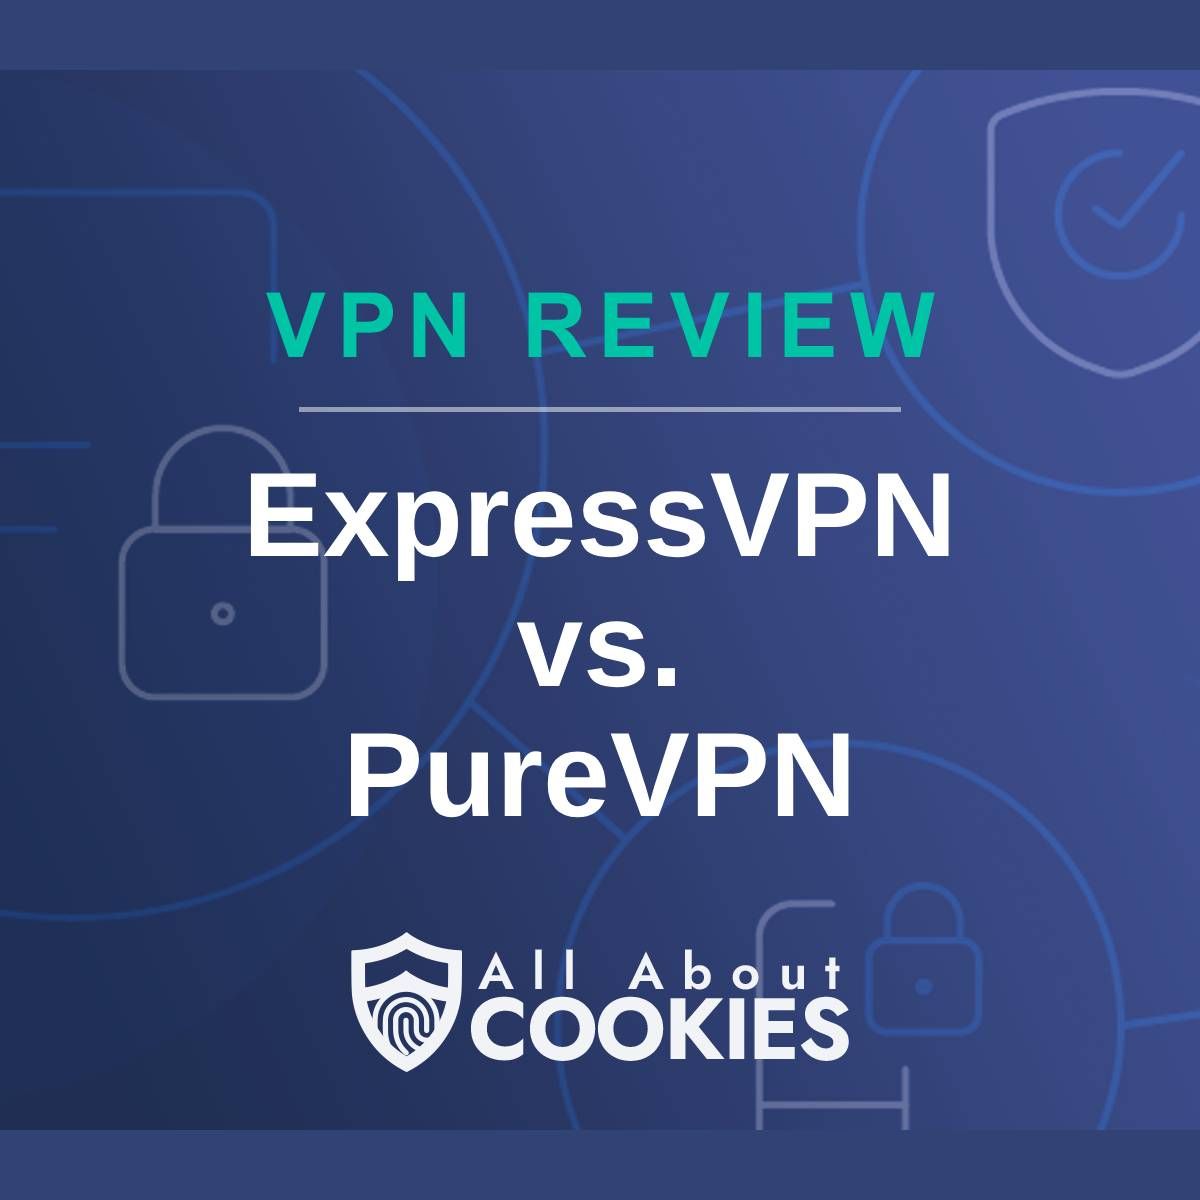 A blue background with images of locks and shields with the text &quot;VPN Review ExpressVPN vs. PureVPN&quot; and the All About Cookies logo. 